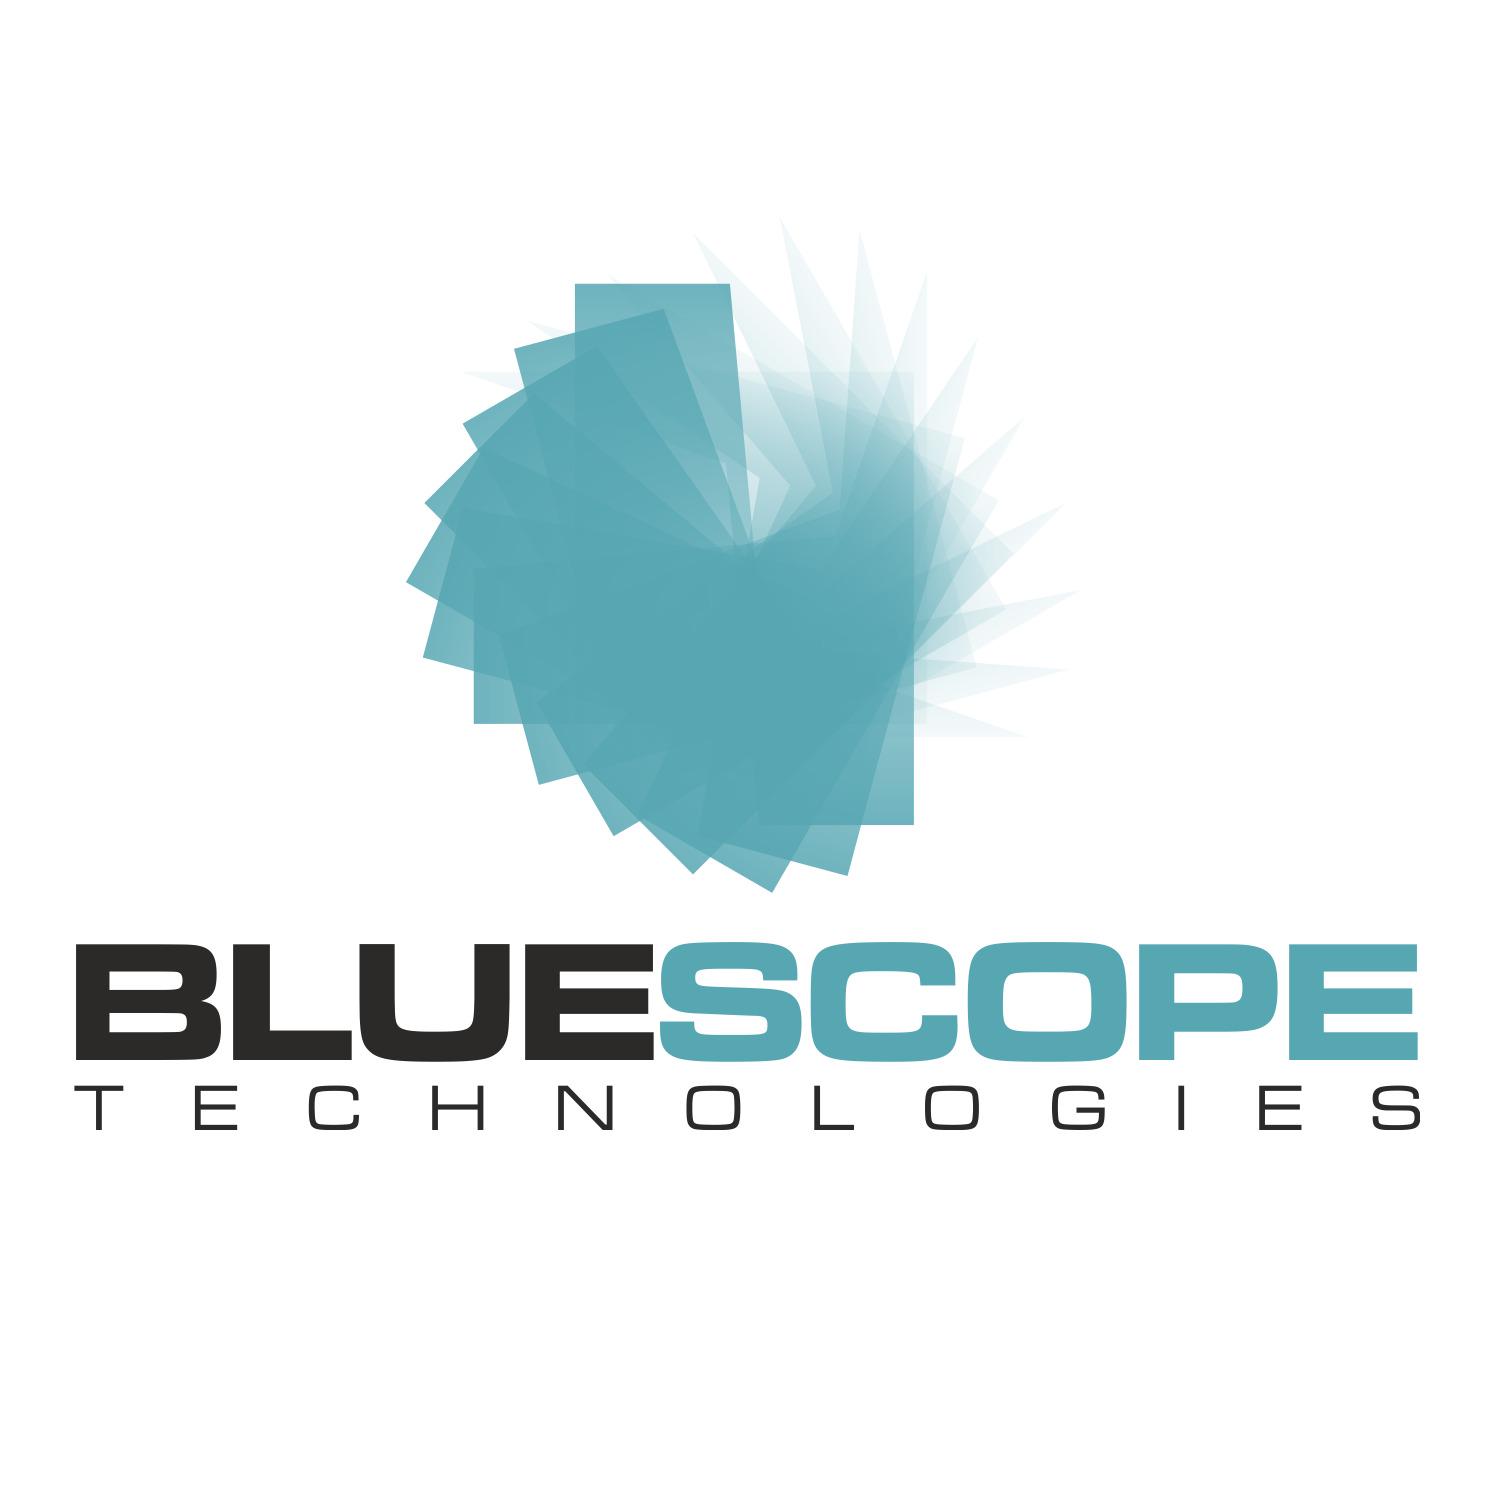 Bluescope Technologies profile on Qualified.One